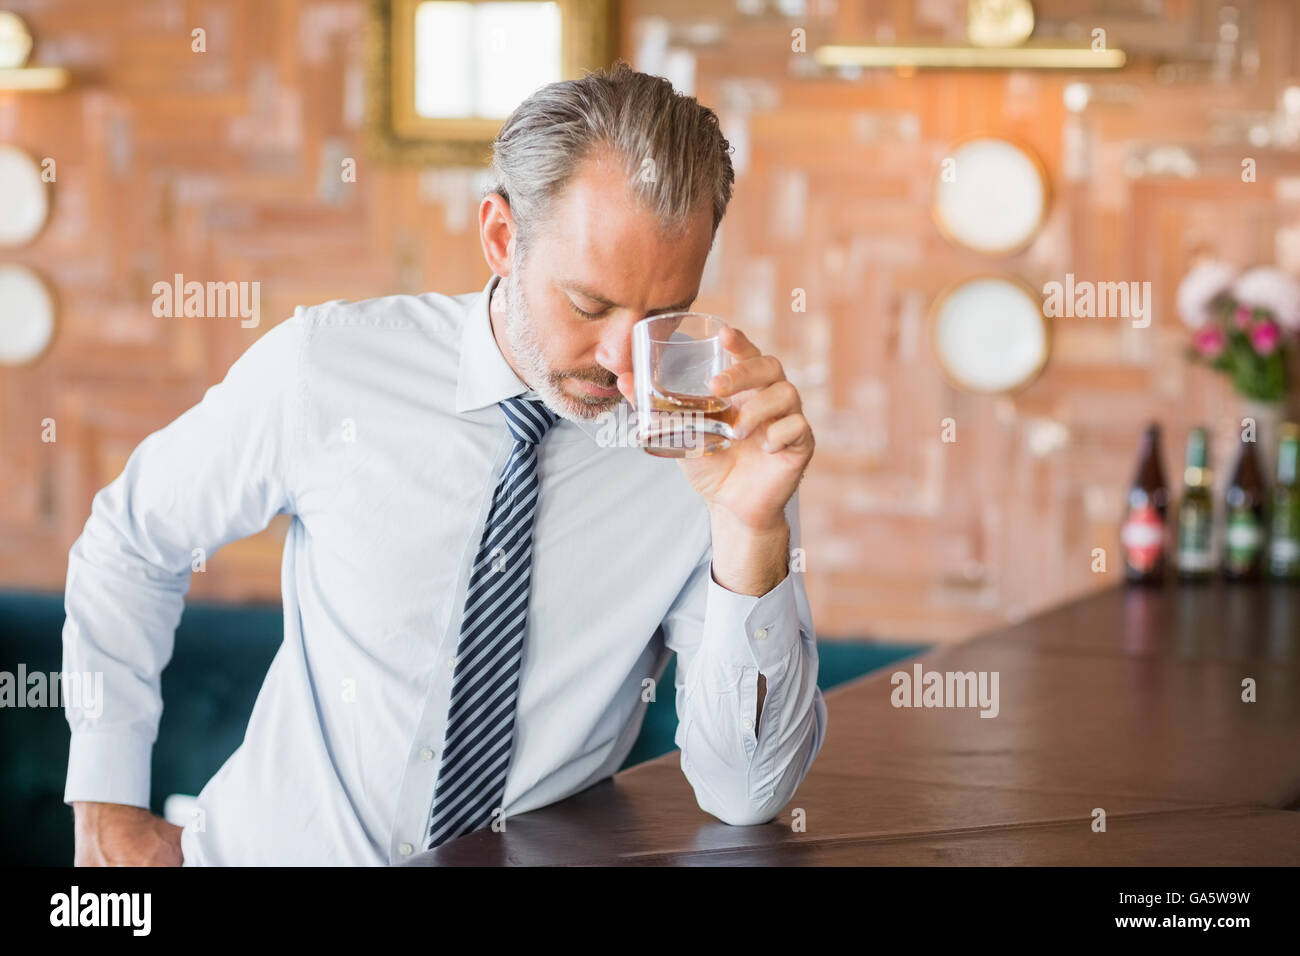 Businessman clutching whiskey glass to forehead Stock Photo